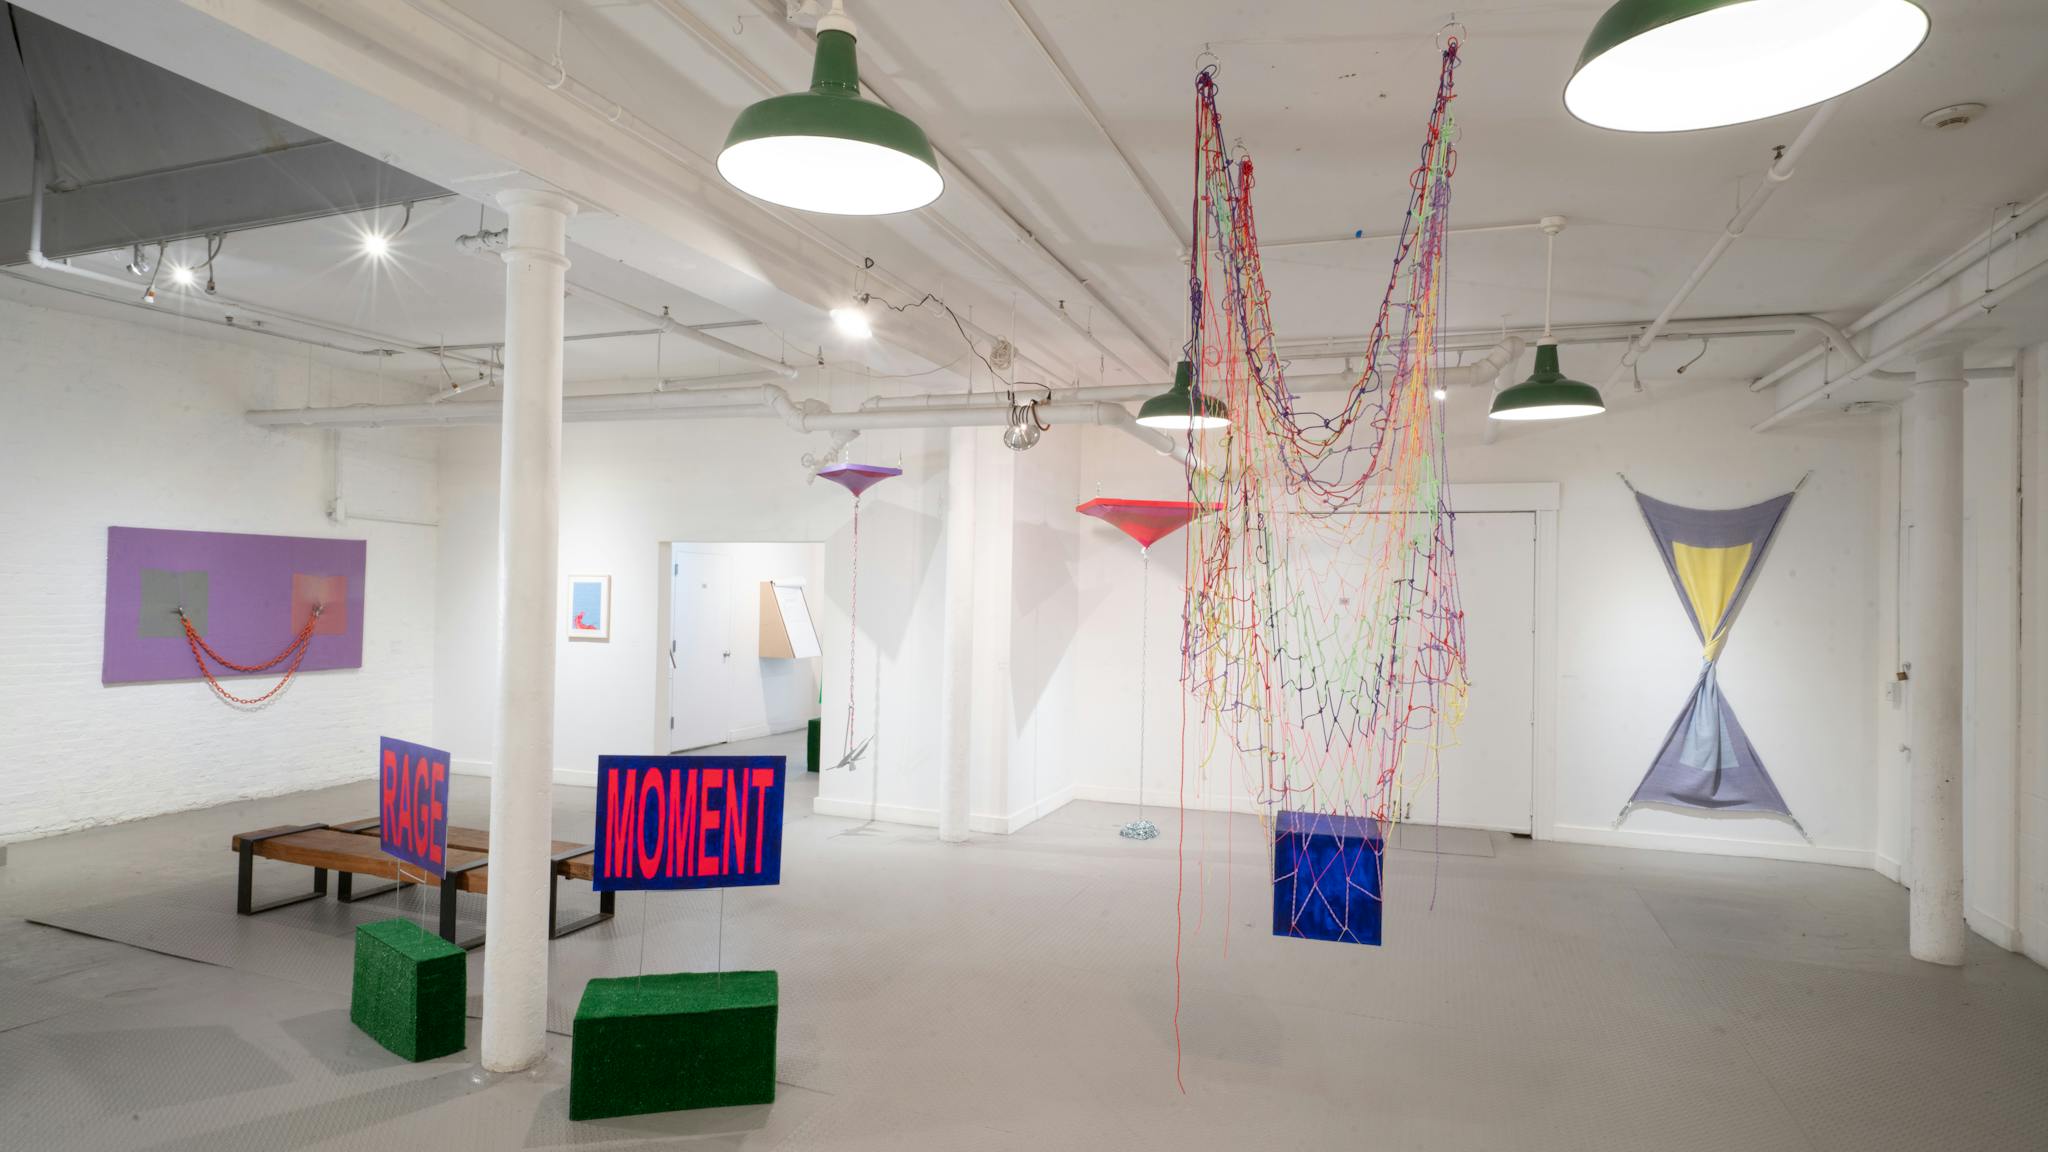 A rainbow net hangs from the ceiling, while signs display the words "rage" and "moment" in an exhibition space.